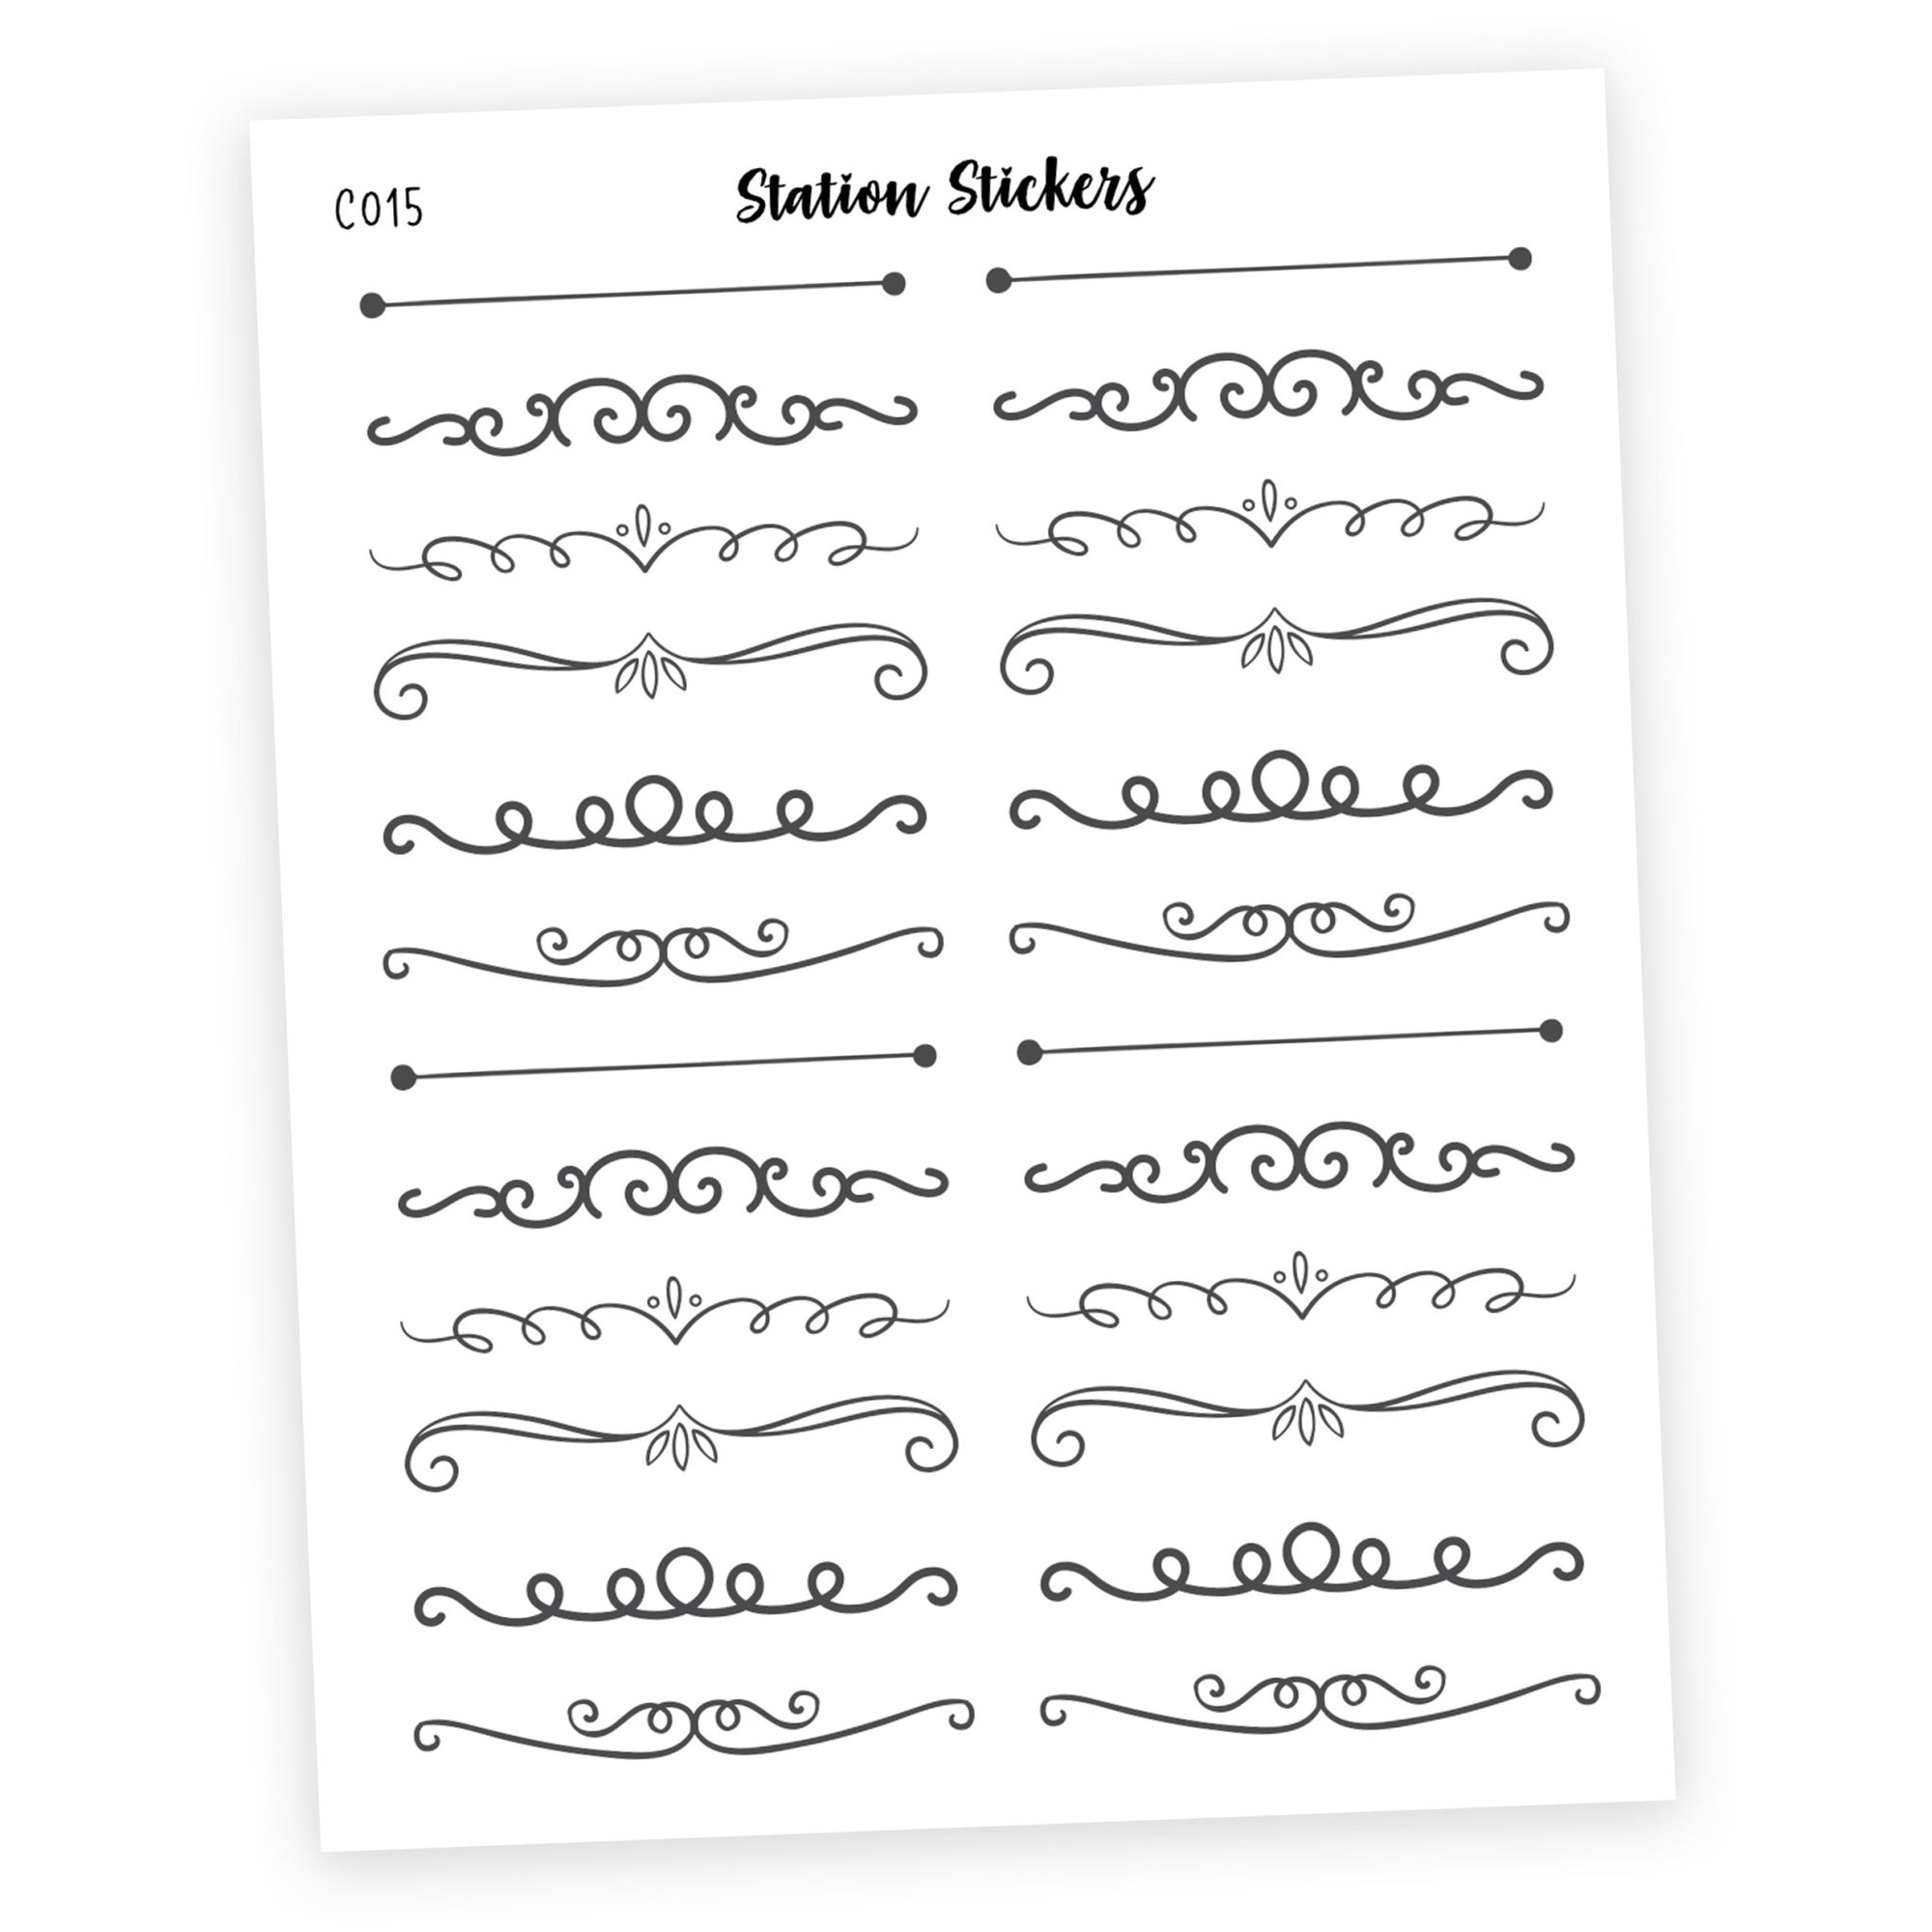 DECO BORDERS #3 - Station Stickers